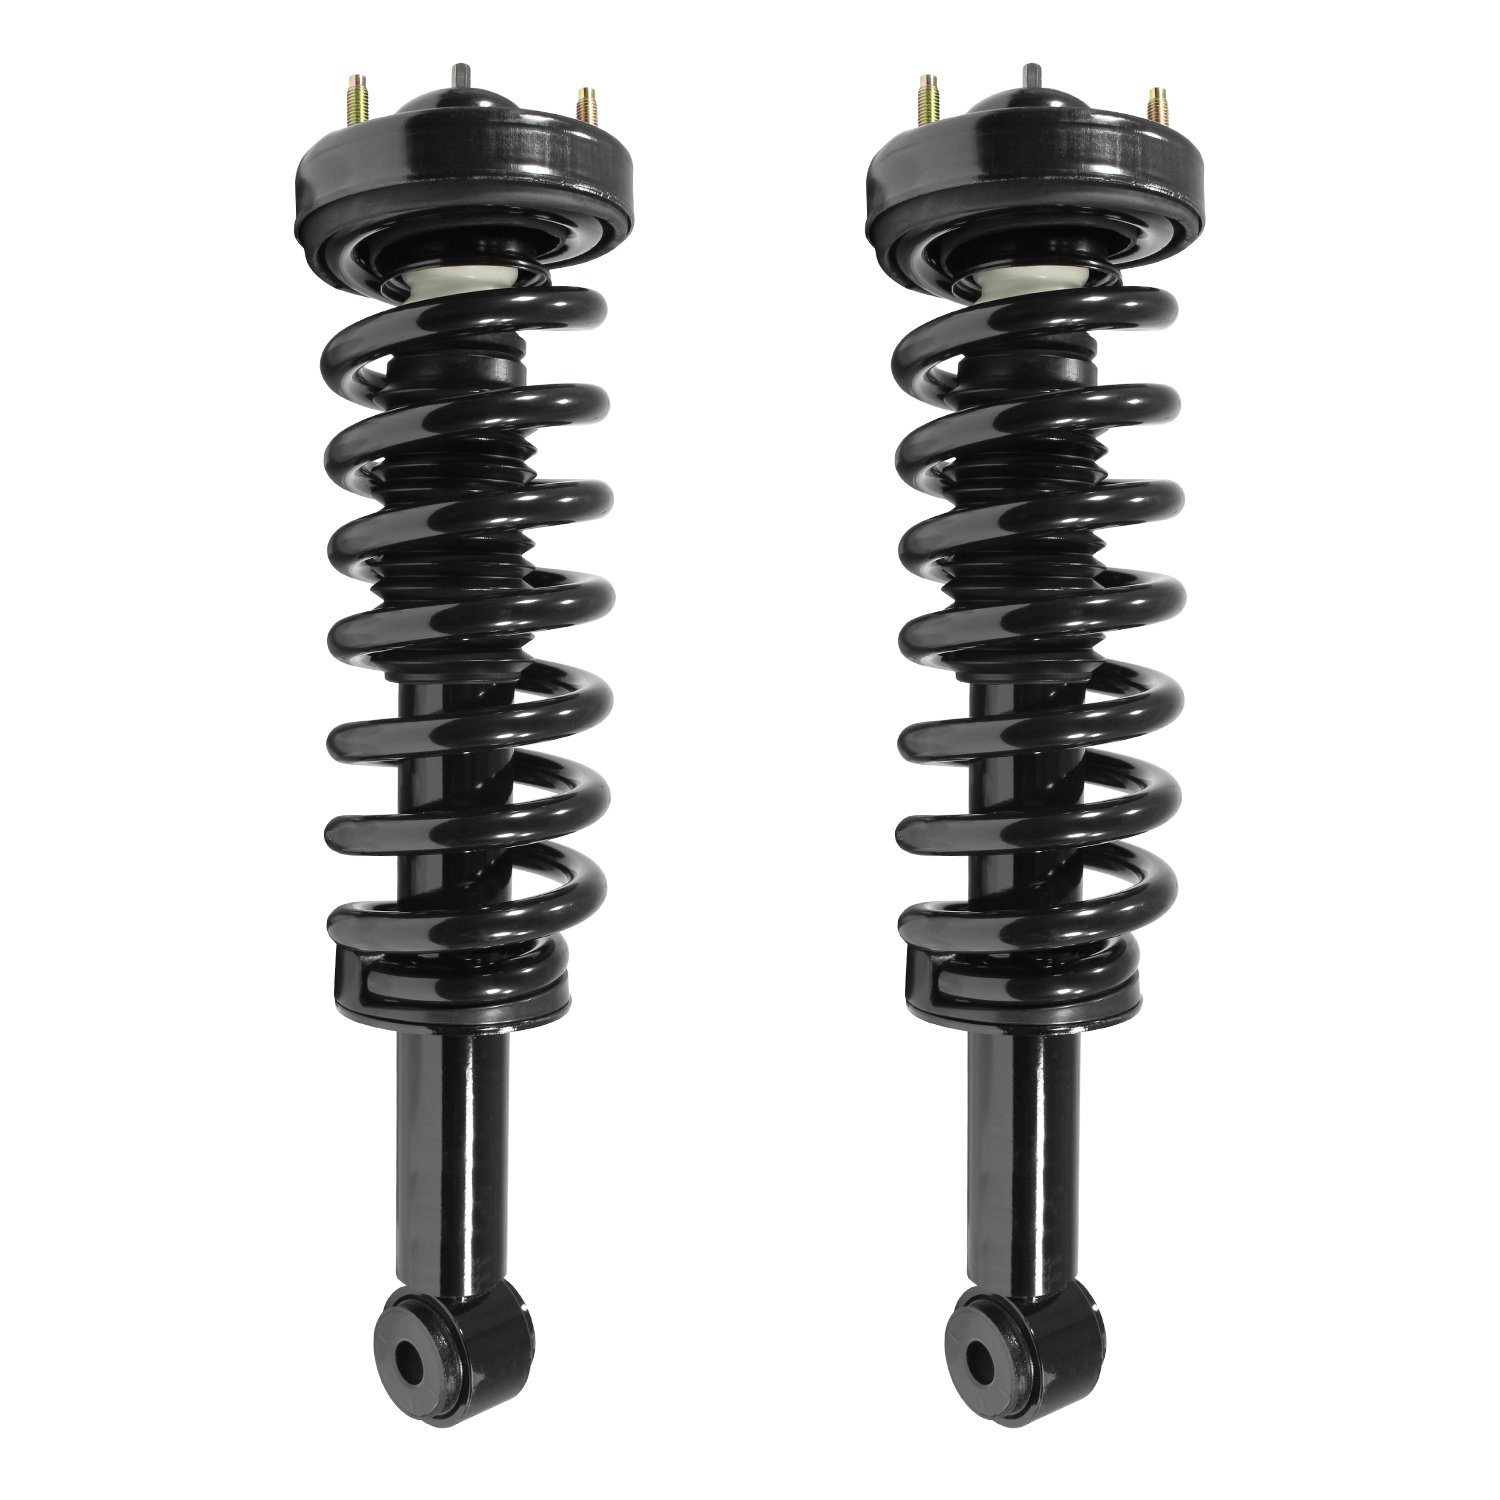 2-11900-001 Suspension Strut & Coil Spring Assembly Set Fits Select Ford Expedition, Lincoln Navigator